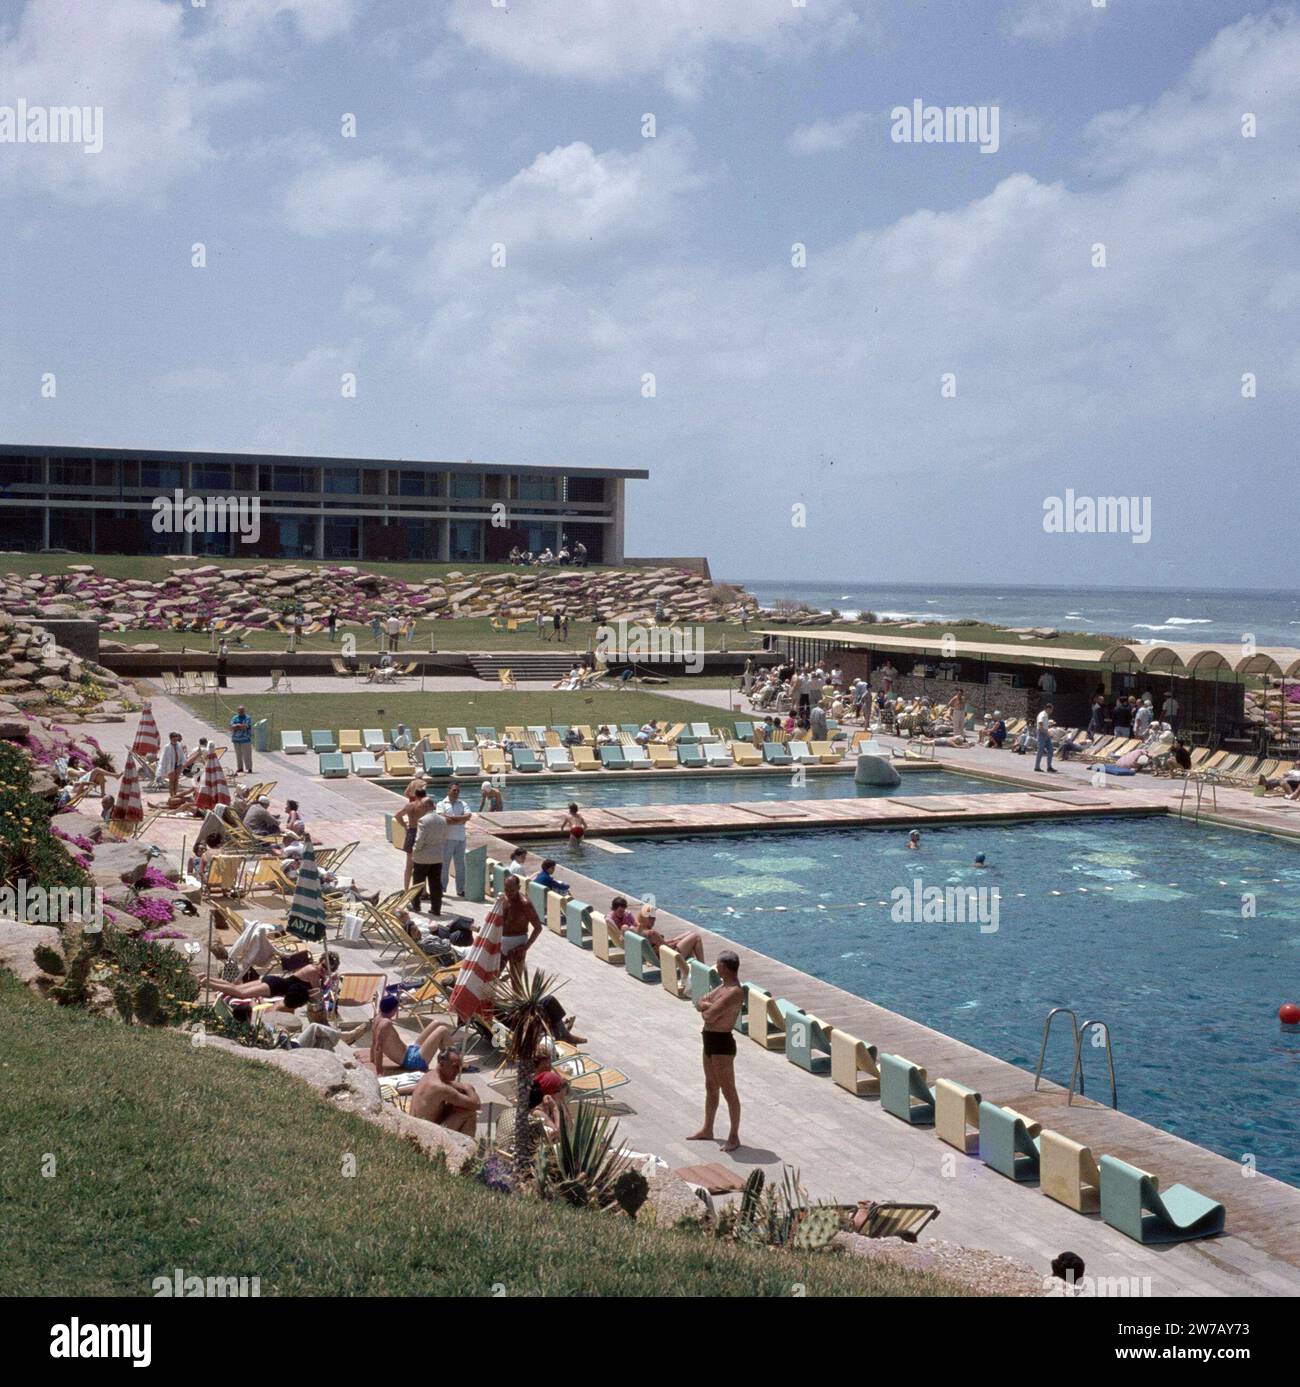 Herzlia. Hotel Accadia: view of the outdoor swimming pool, the sun terraces and a wing of the hotel with the waves of the Mediterranean Sea on the right ca. undated Stock Photo